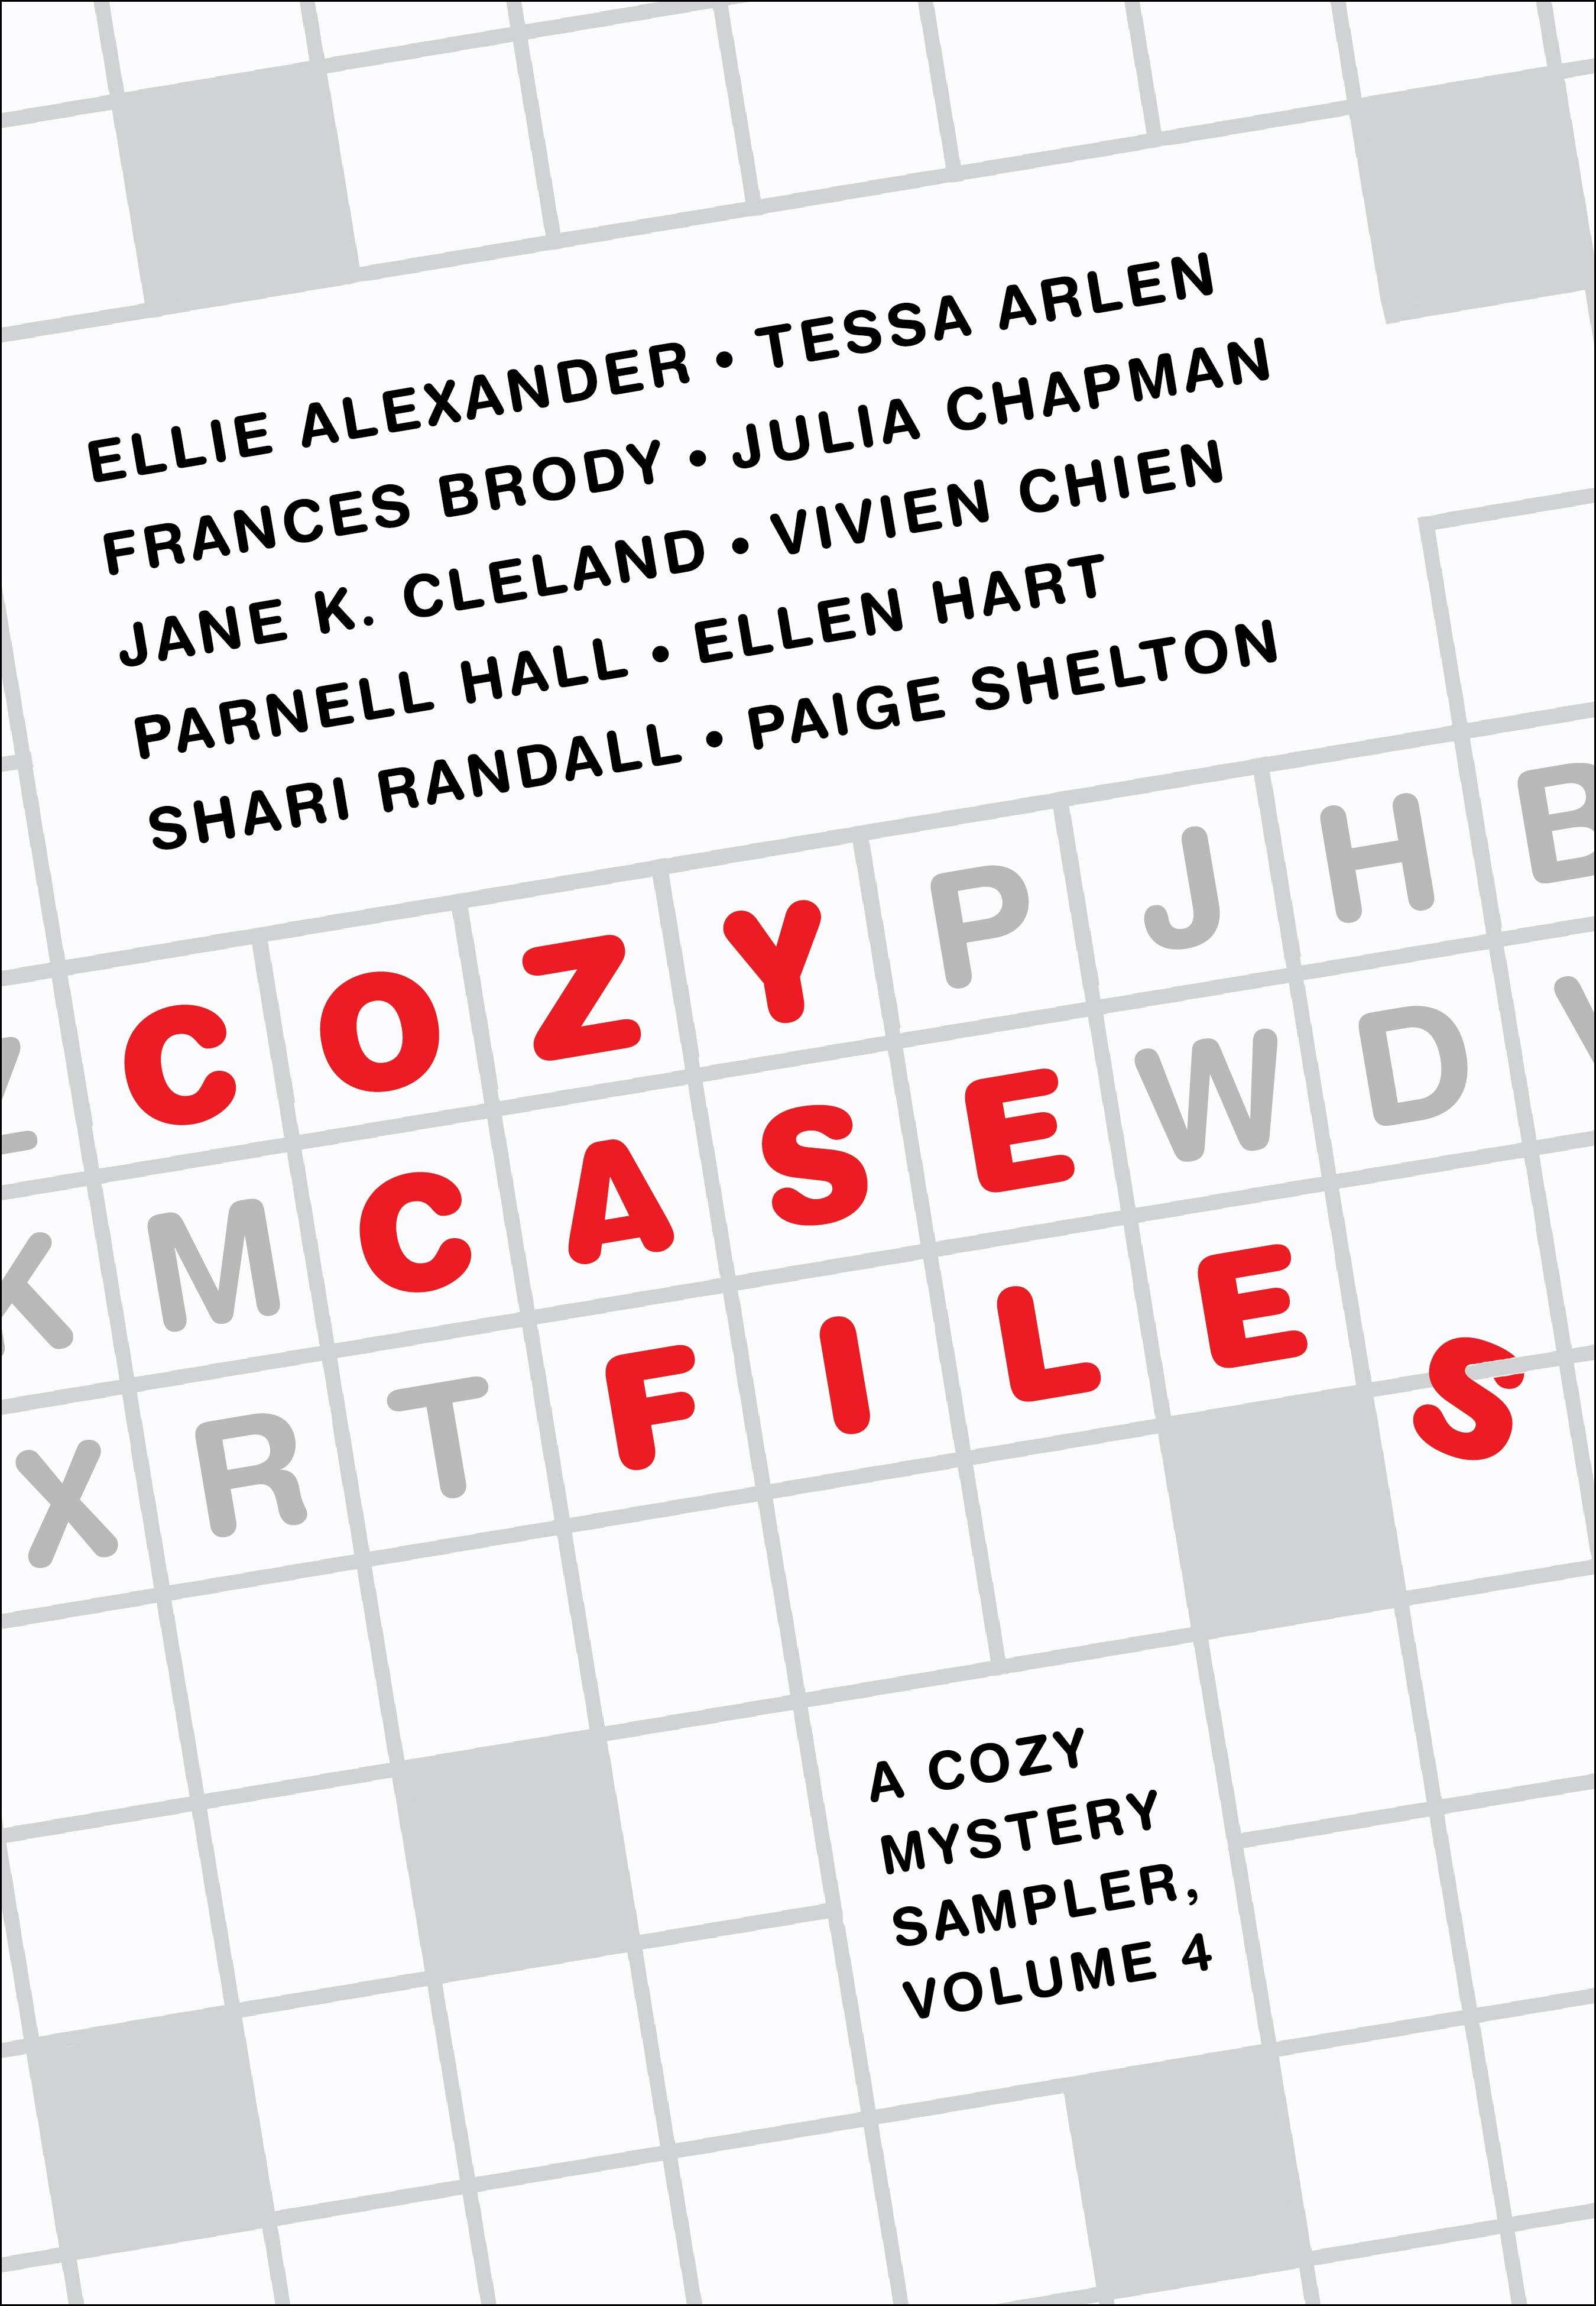 Image of Cozy Case Files: A Cozy Mystery Sampler, Volume 4